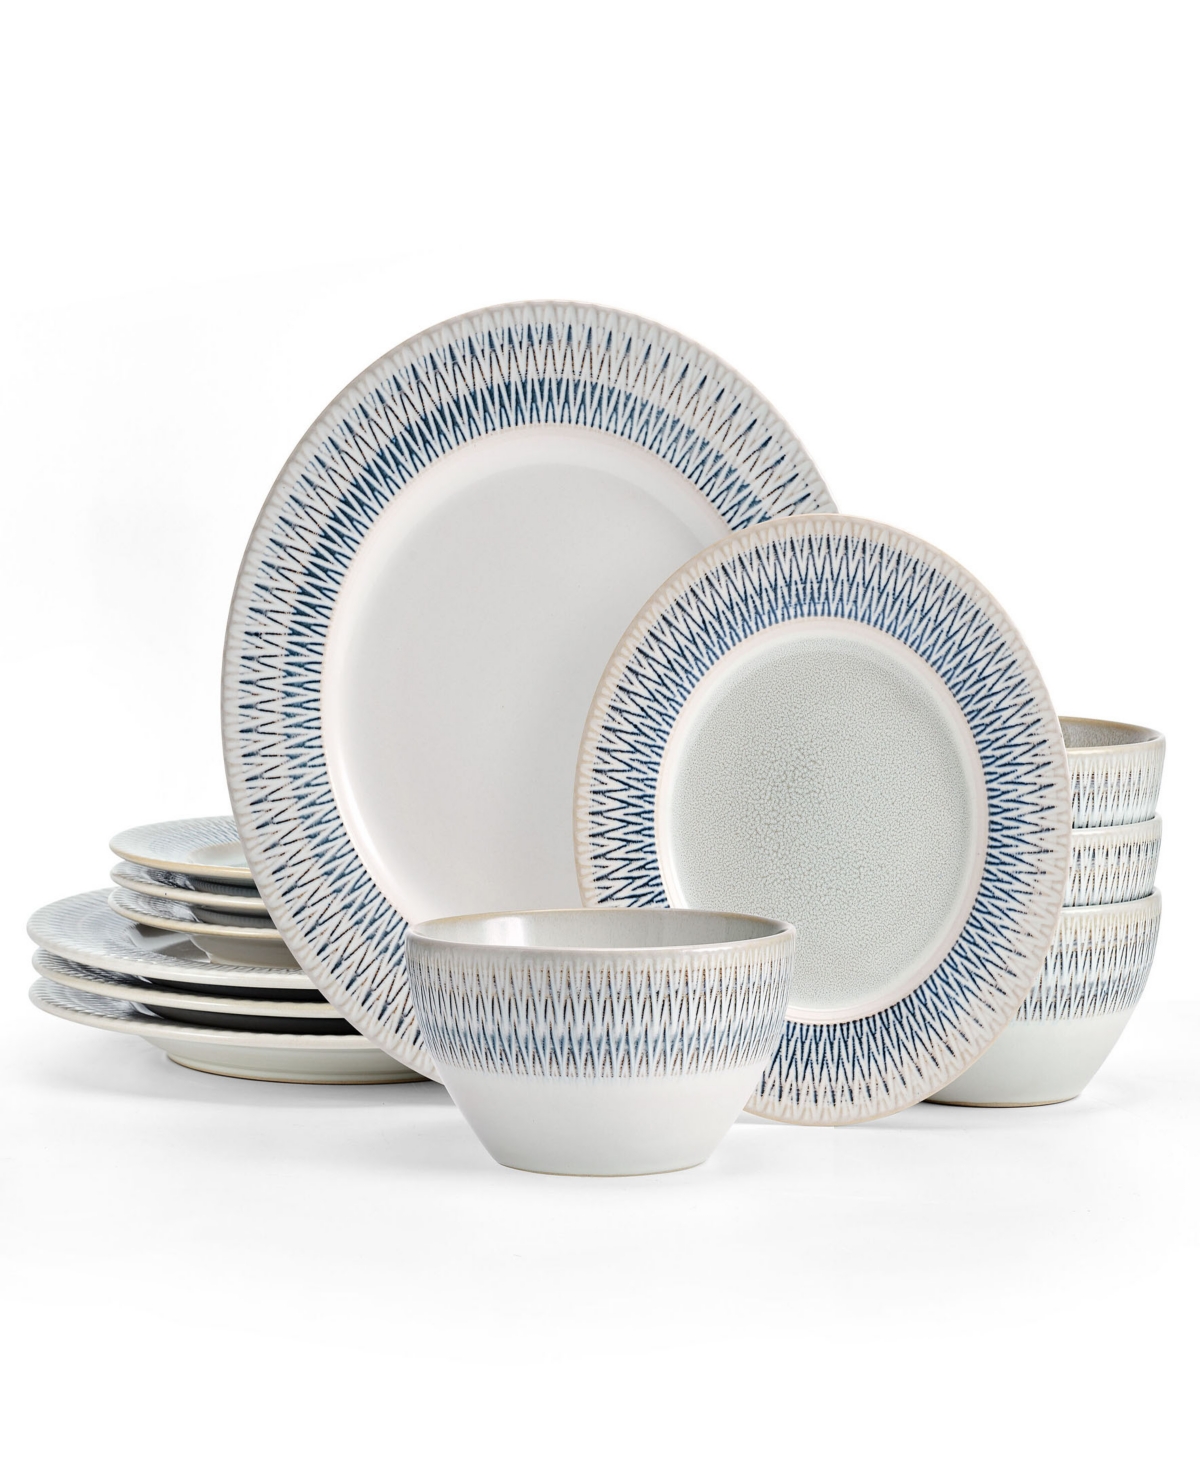 Casey 12-Pc Dinnerware Set, Service for 4 - Assorted